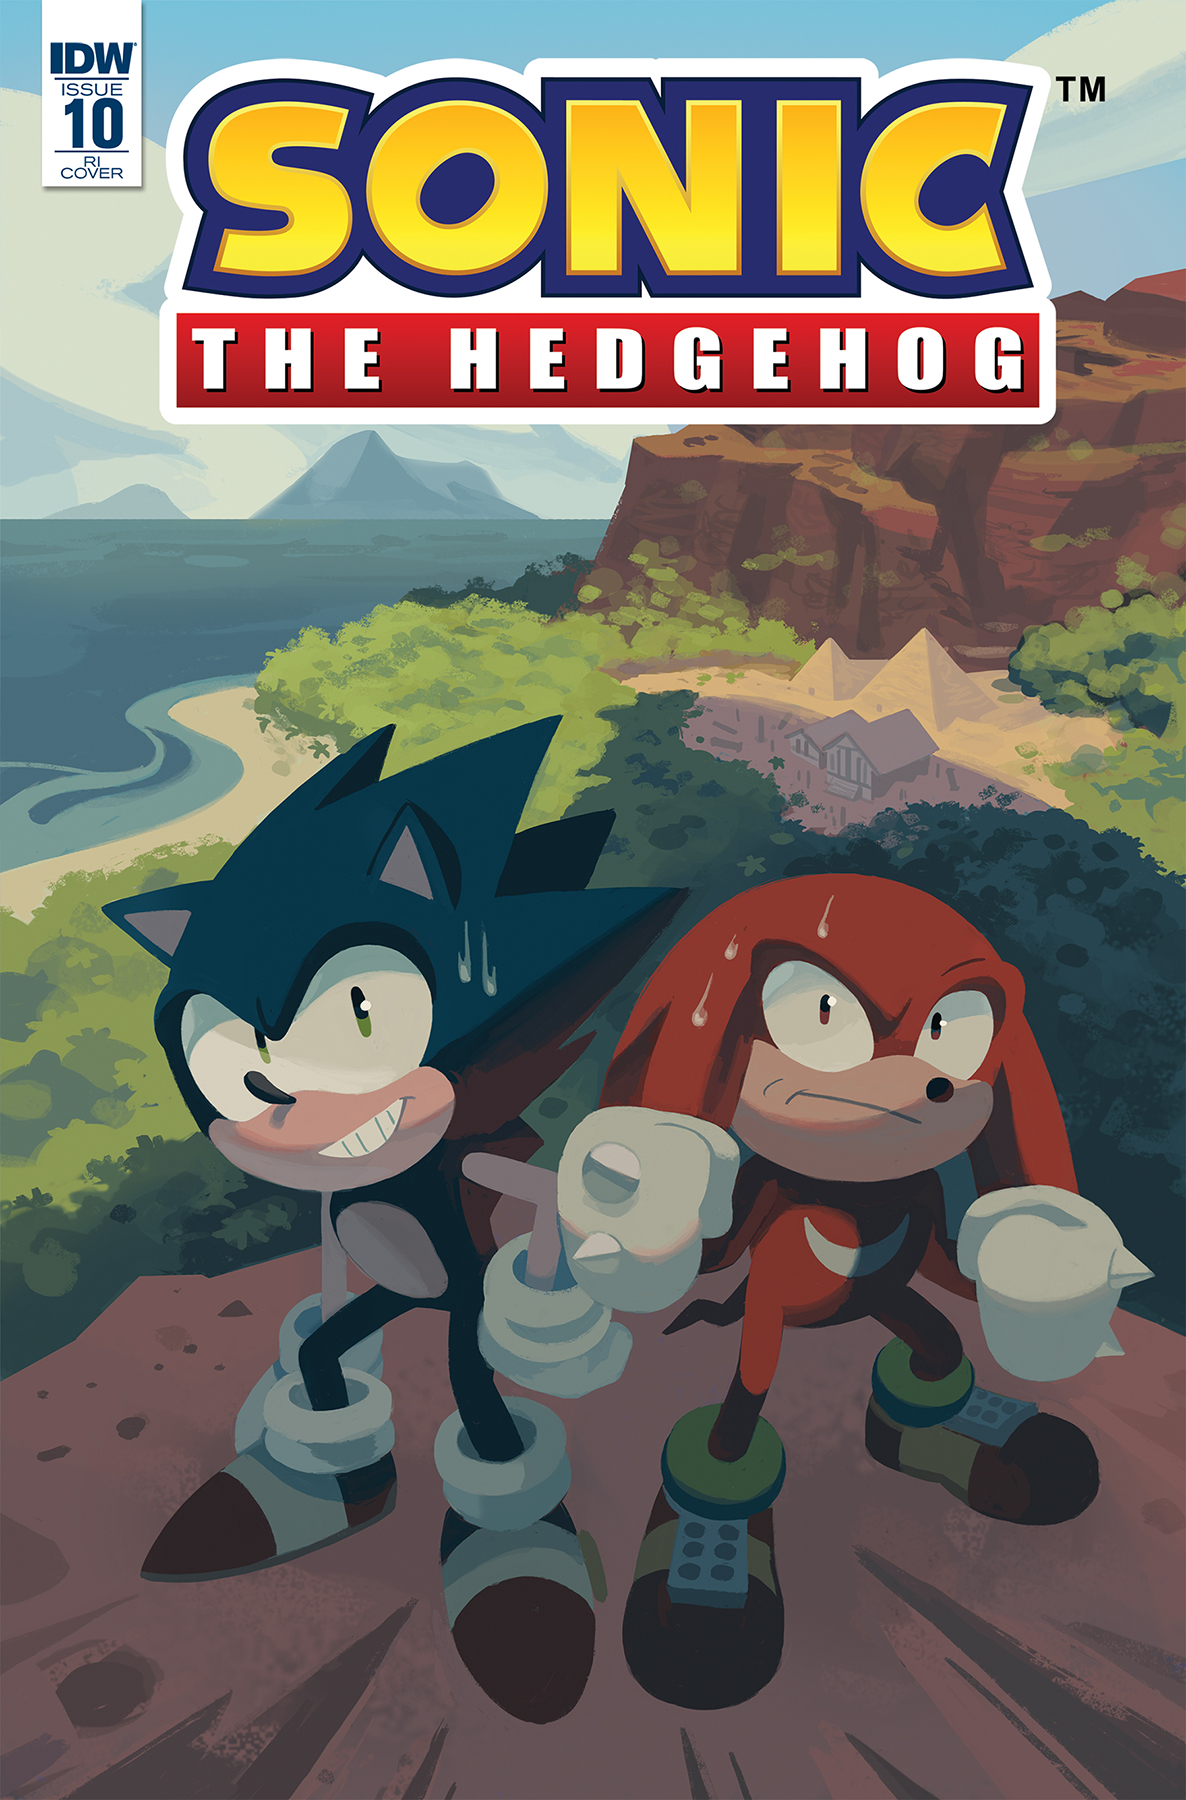 [idw-sonic minirant] reuse of art and lazy covers by Nintrendodude on DeviantArt1186 x 1800